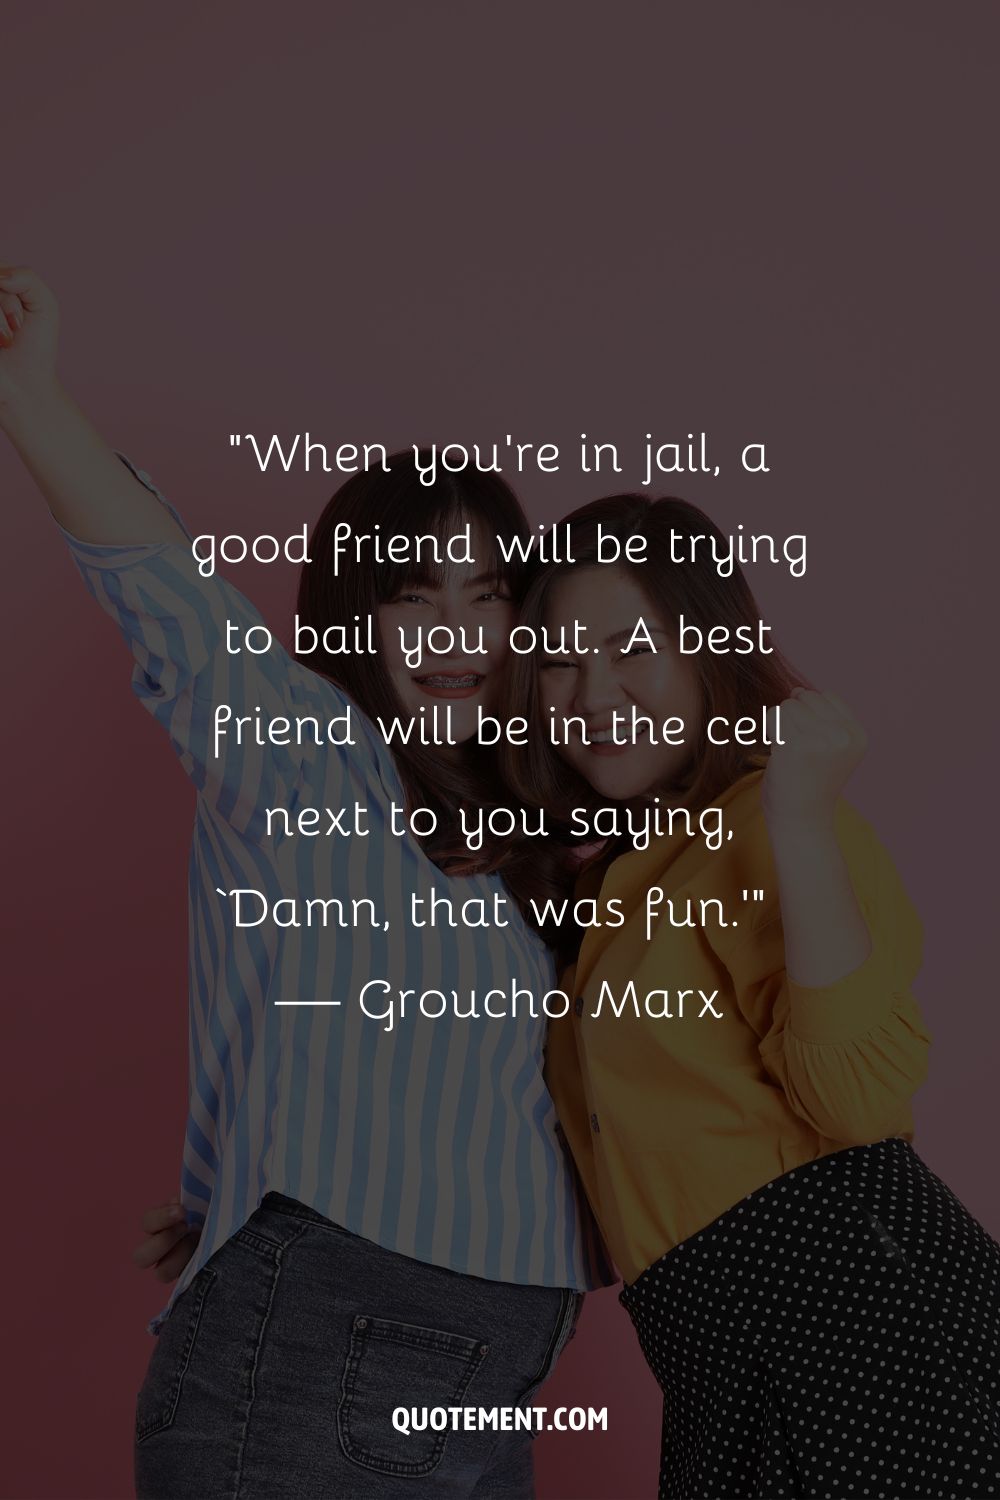 Two young women in embrace, one with her arm raised representing a crazy friends quote
